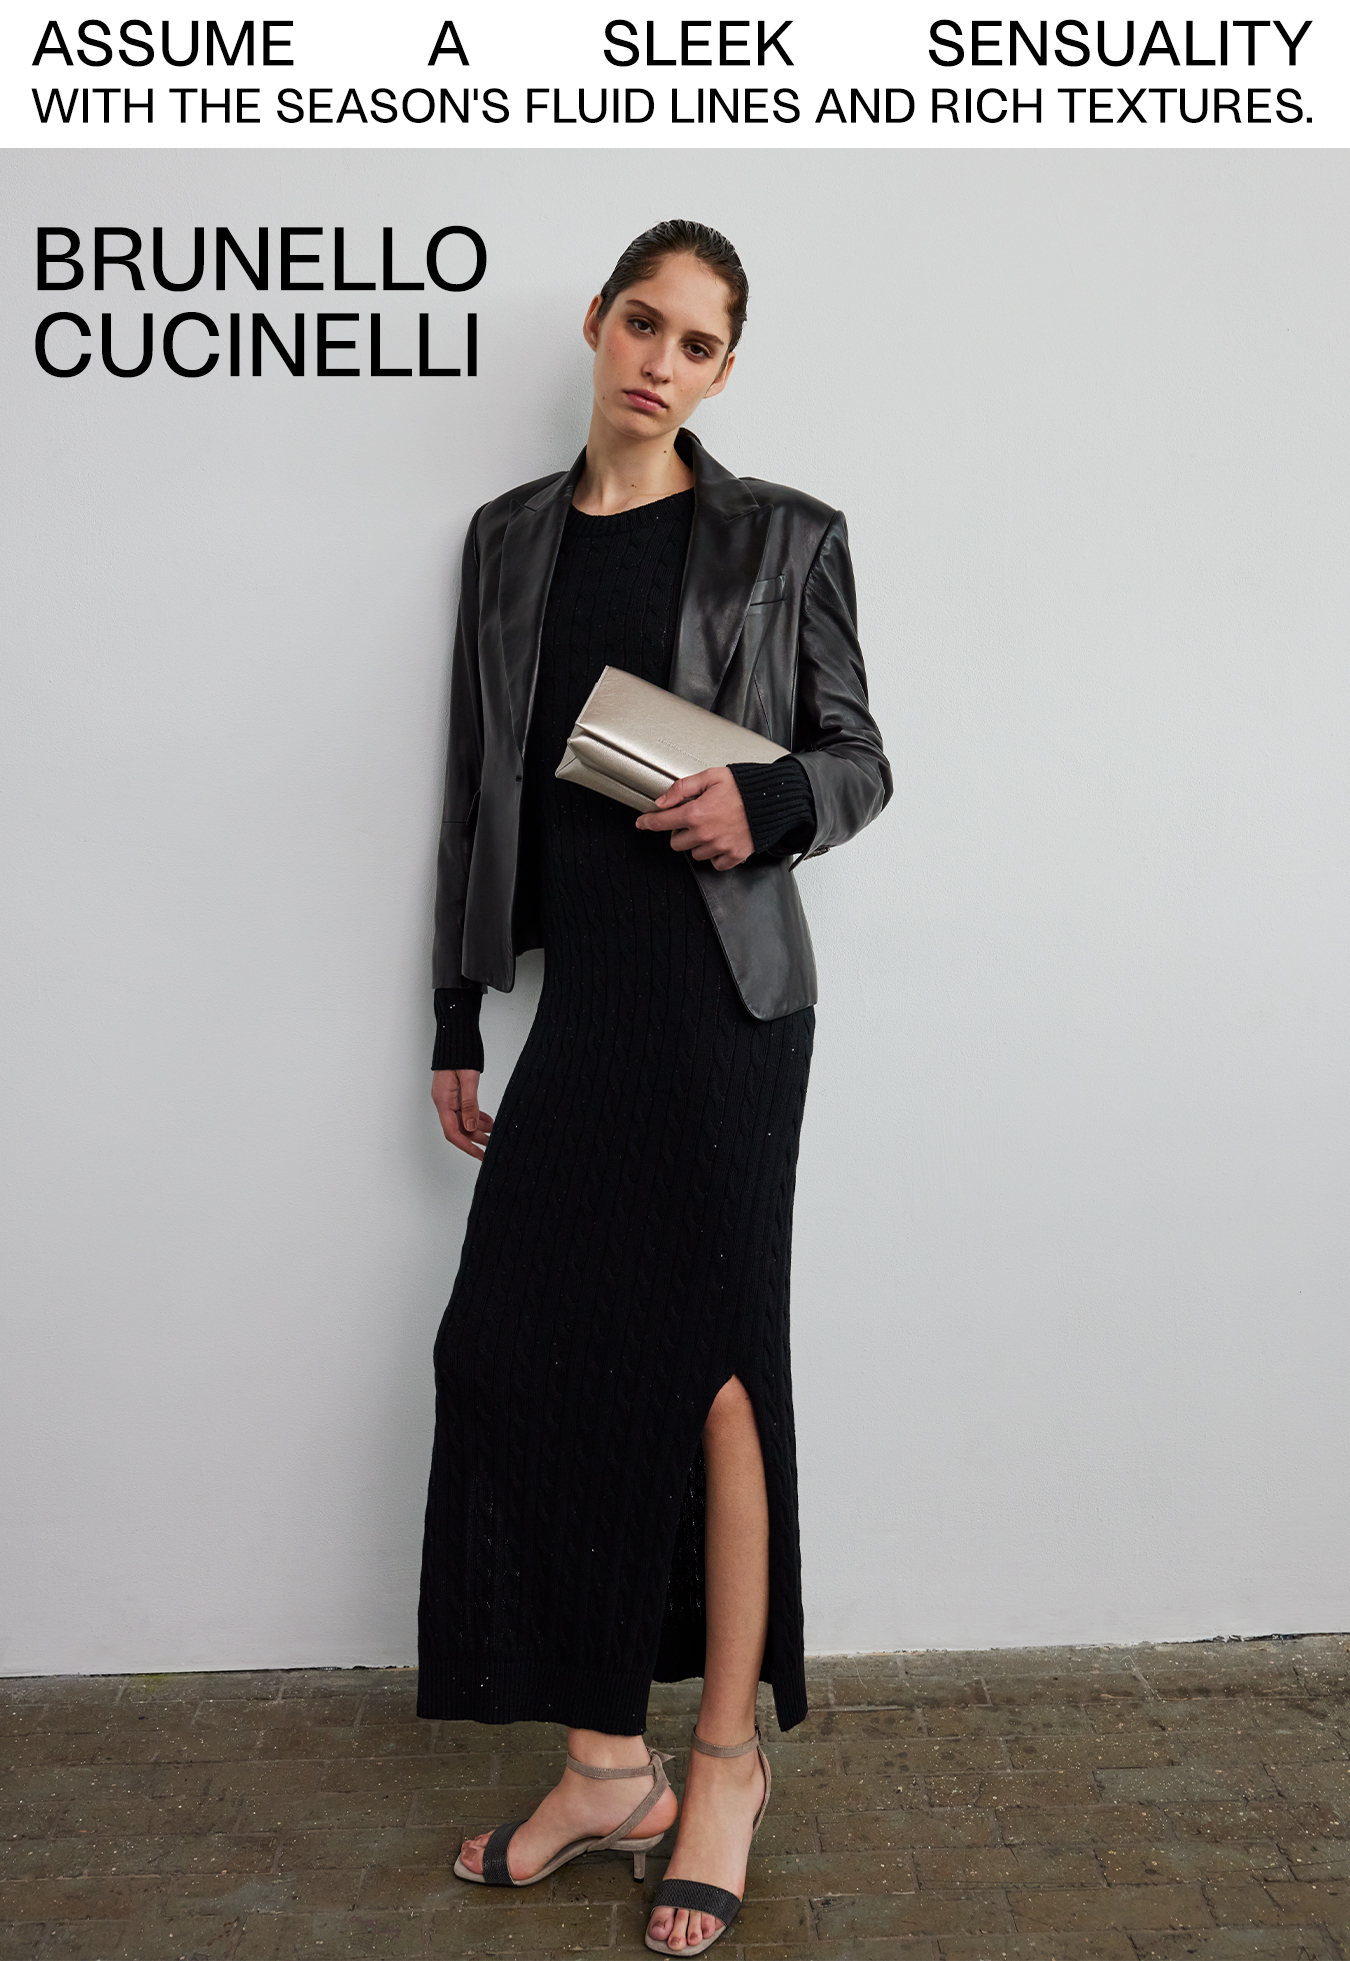 Brunello Cucinelli - Assume a sleek sensuality with the season's fluid lines and rich textures.